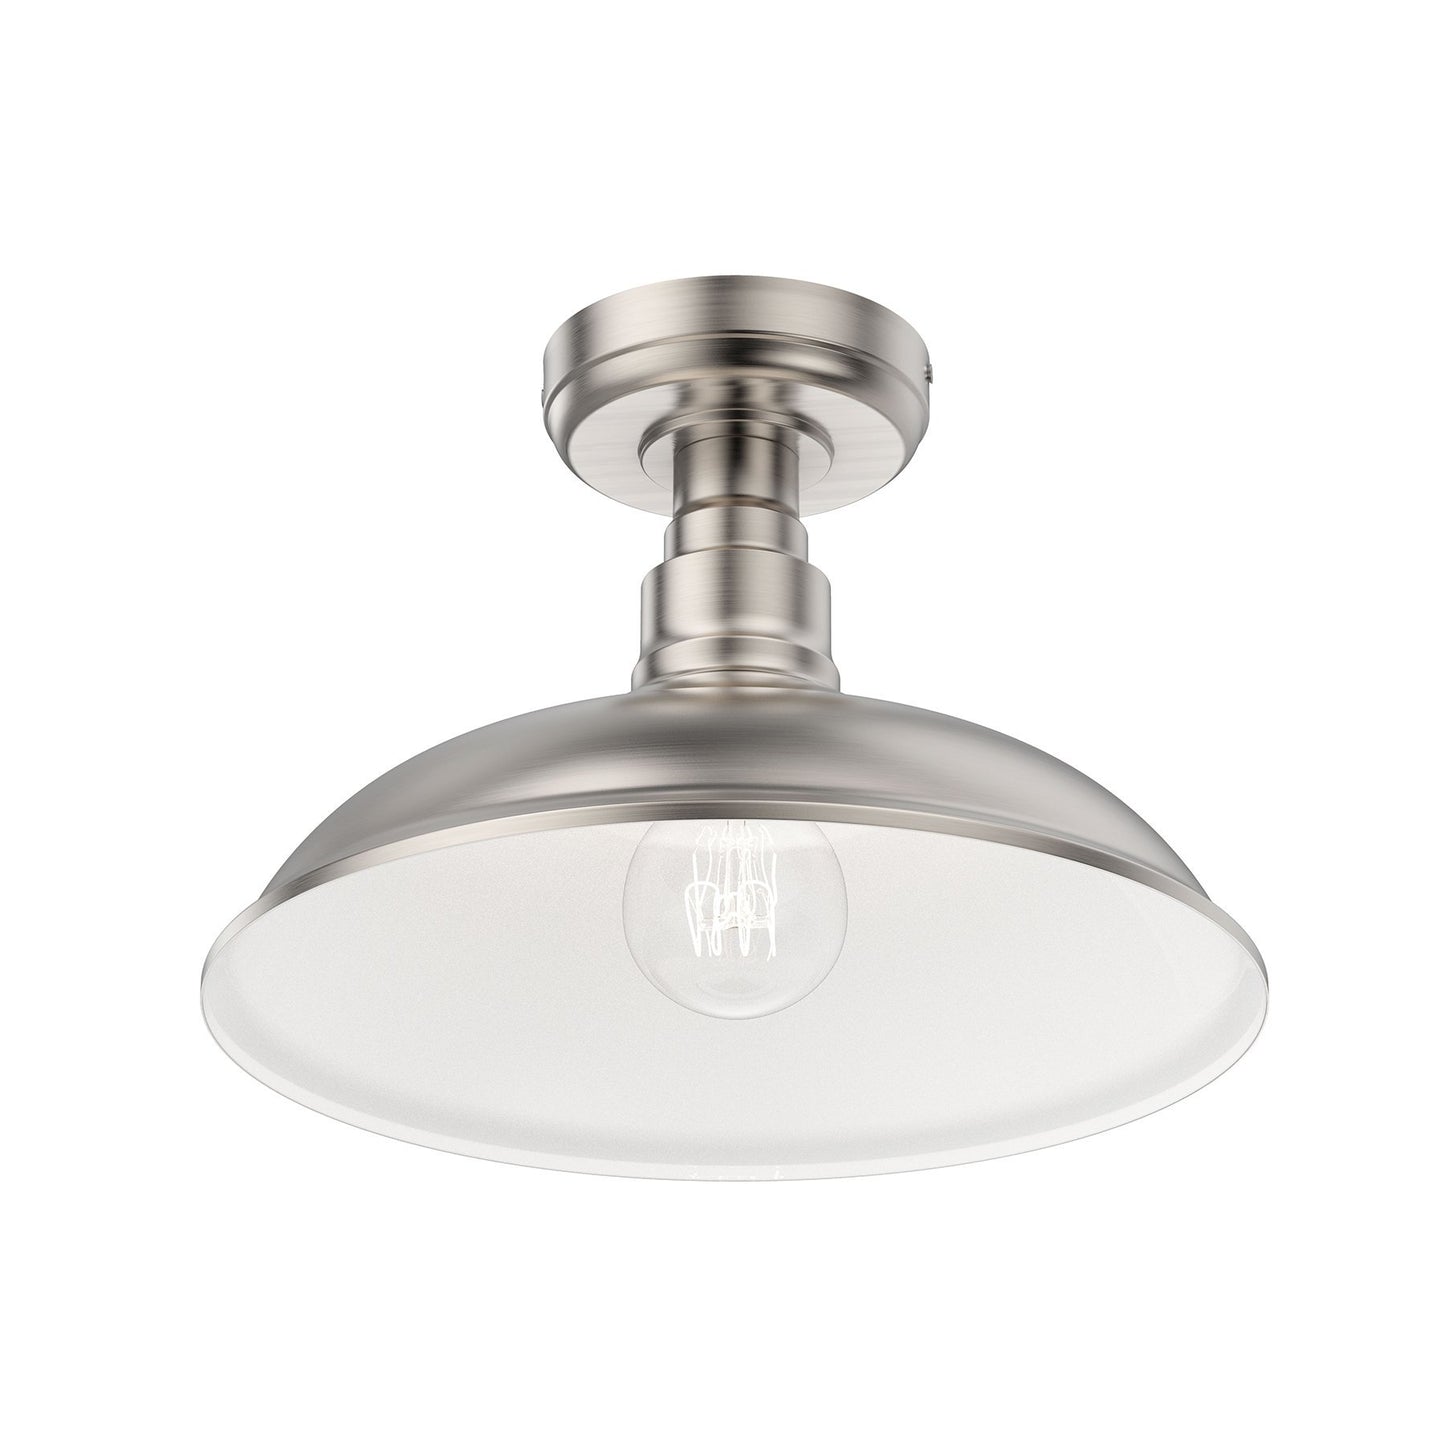 Industrial Style Brushed Nickel Semi Flush Mount Ceiling Fixture, E26 Base, UL Listed, 3 Years Warranty